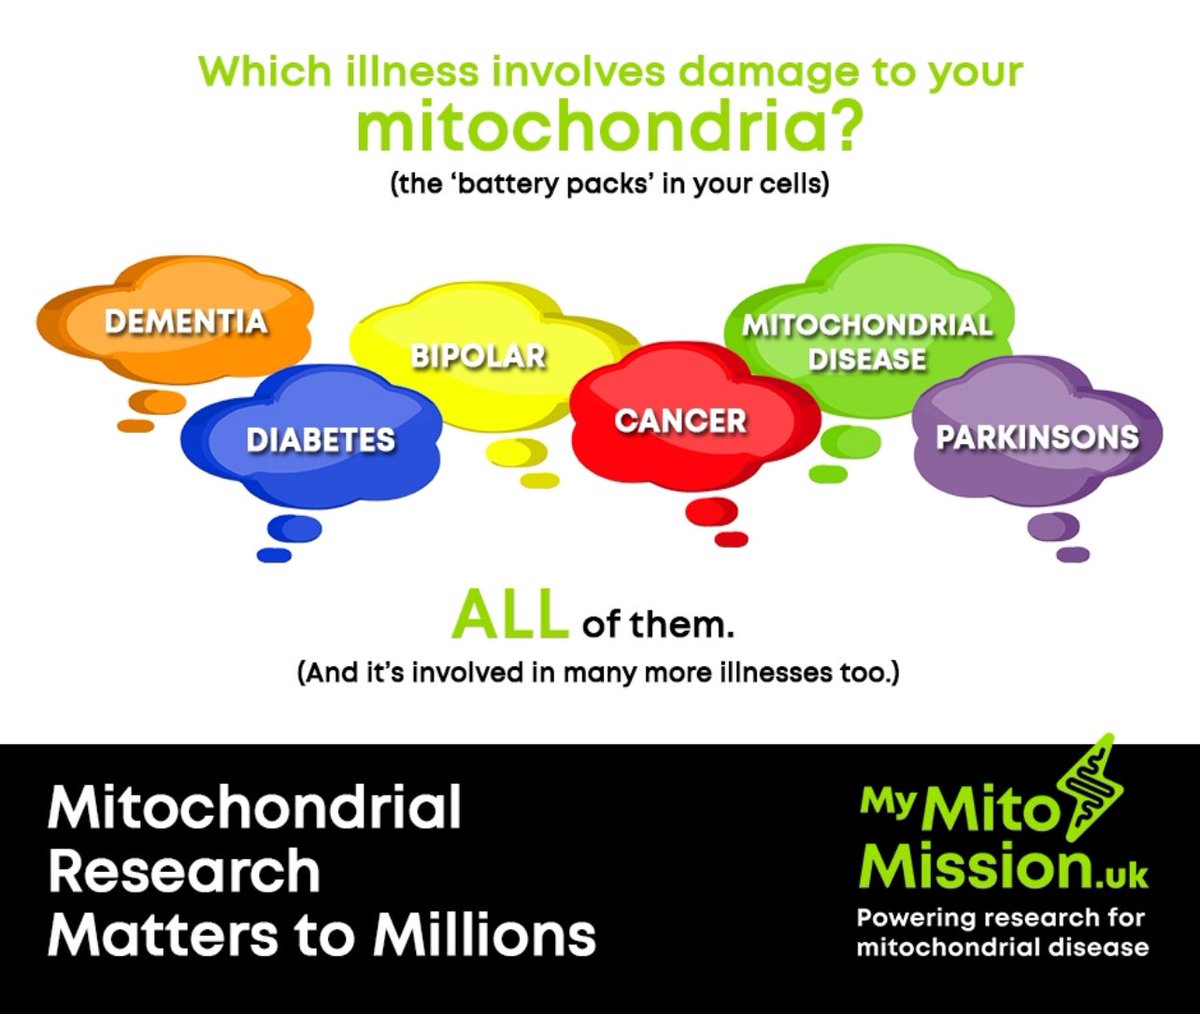 Which illness involves damage to your mitochondria? @mymitomission @muscularartdonations
muscularartdonations.co.uk